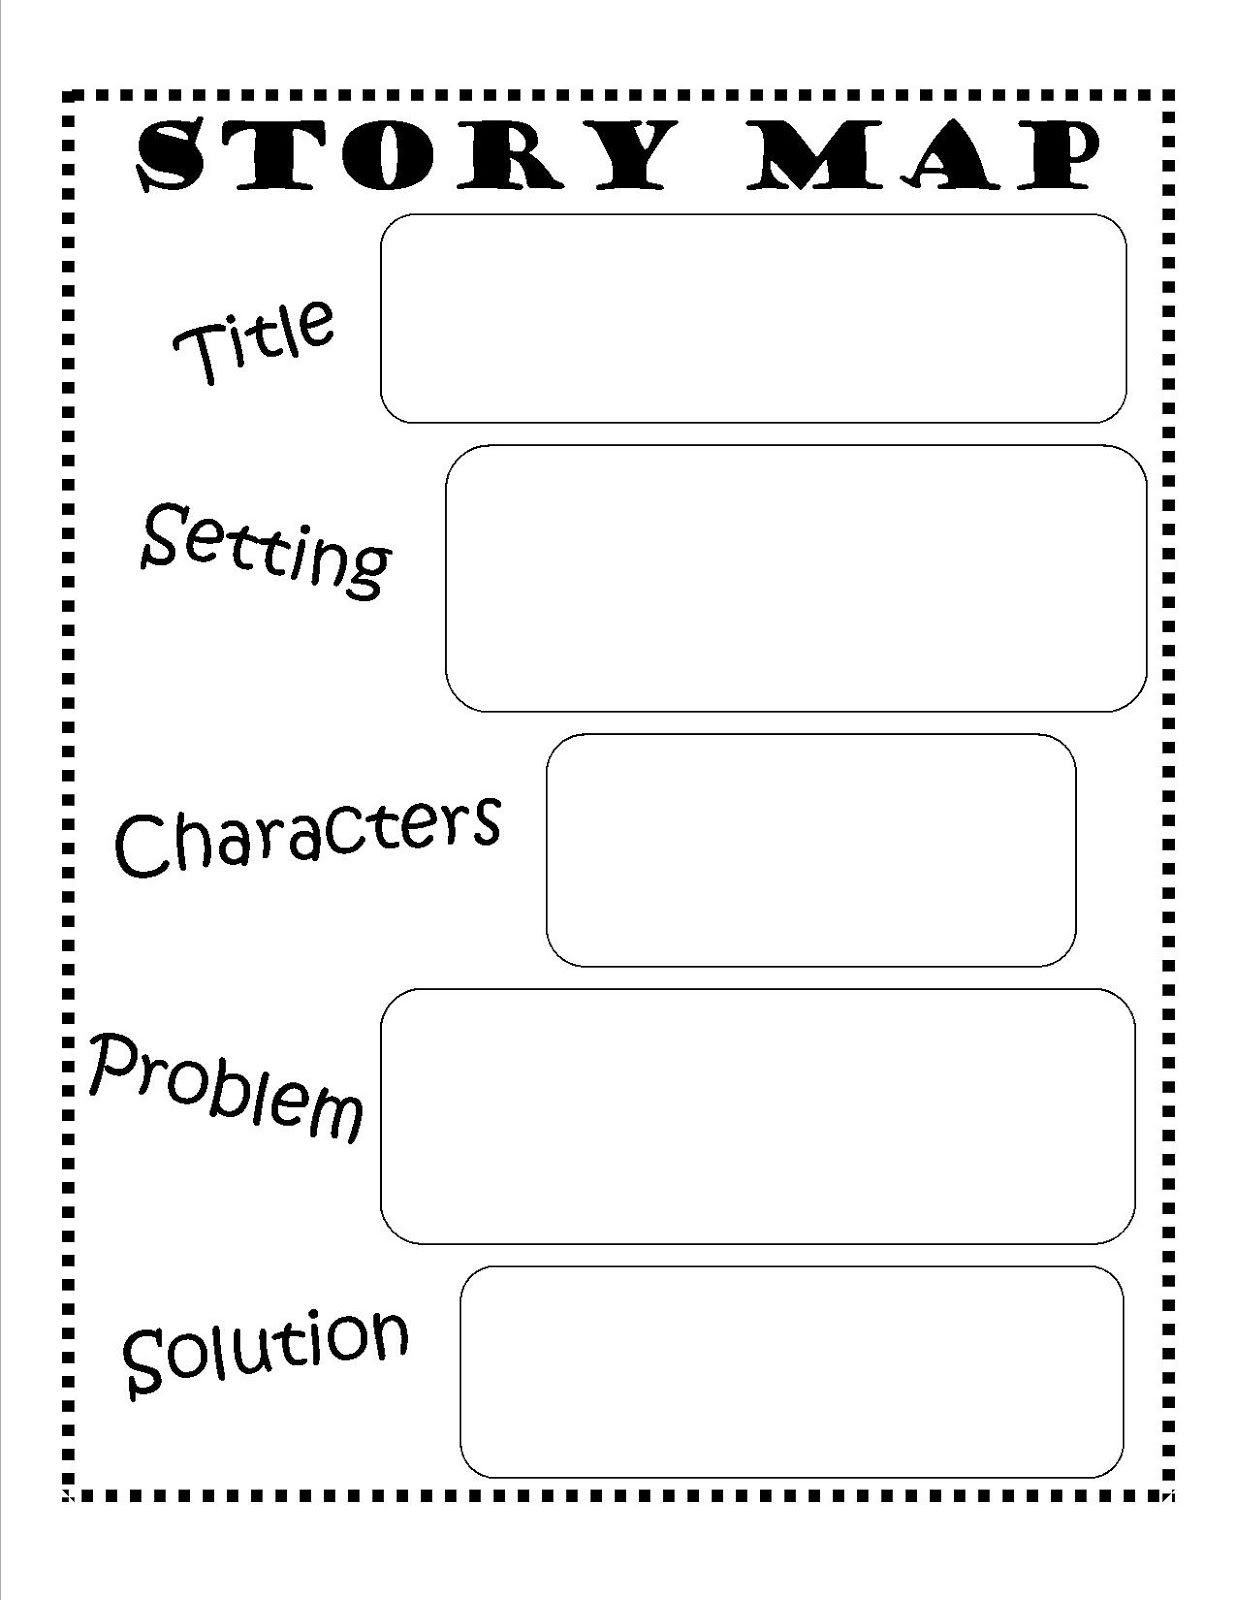 Parts Of A Map Worksheet Story Map topographic Maps Worksheets 5th Grade Ytjm96ol In